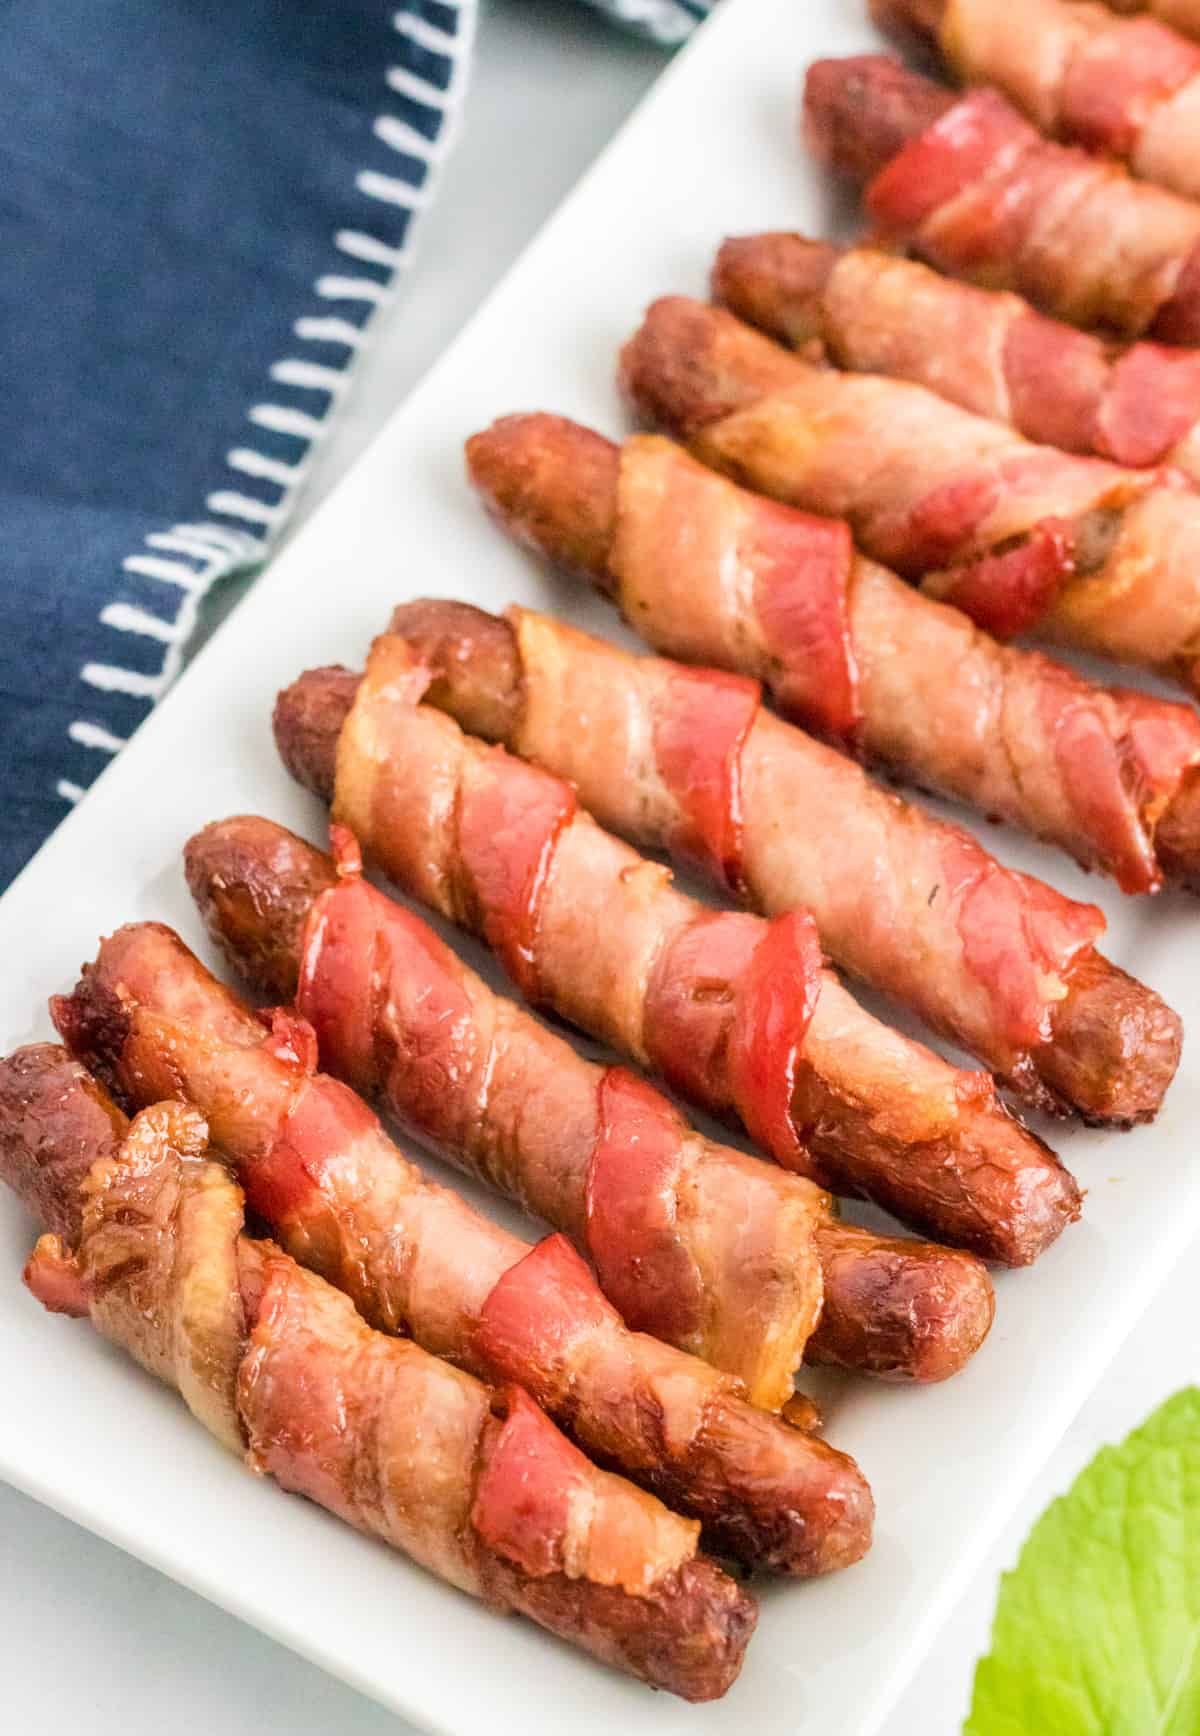 Overhead of Bacon Wrapped Sausages on white serving platter.